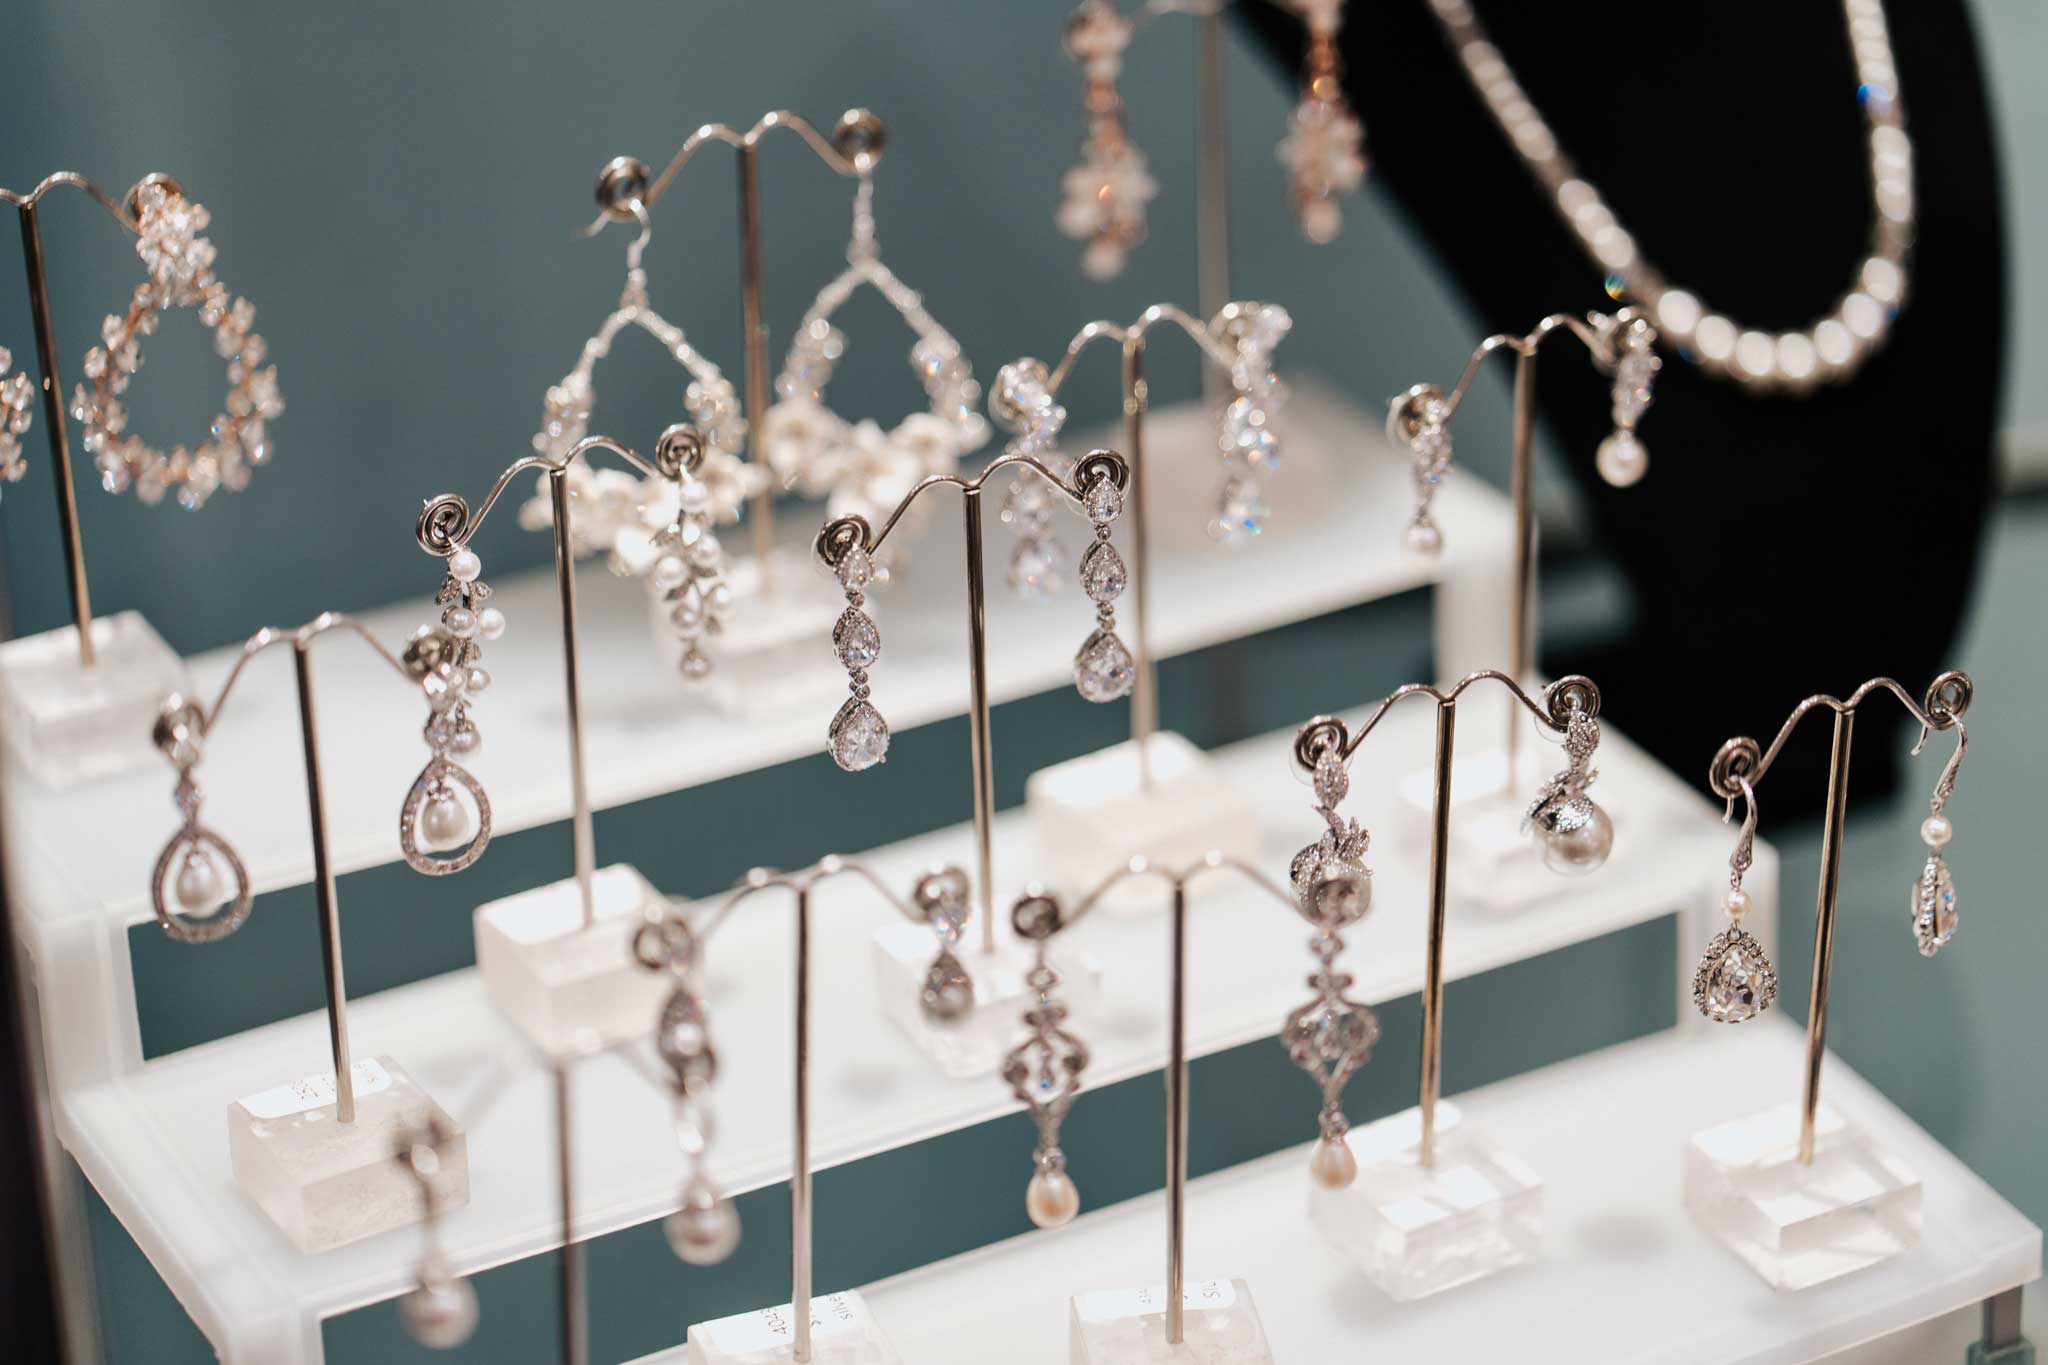 A display of necklaces and earrings in a bridal shop.